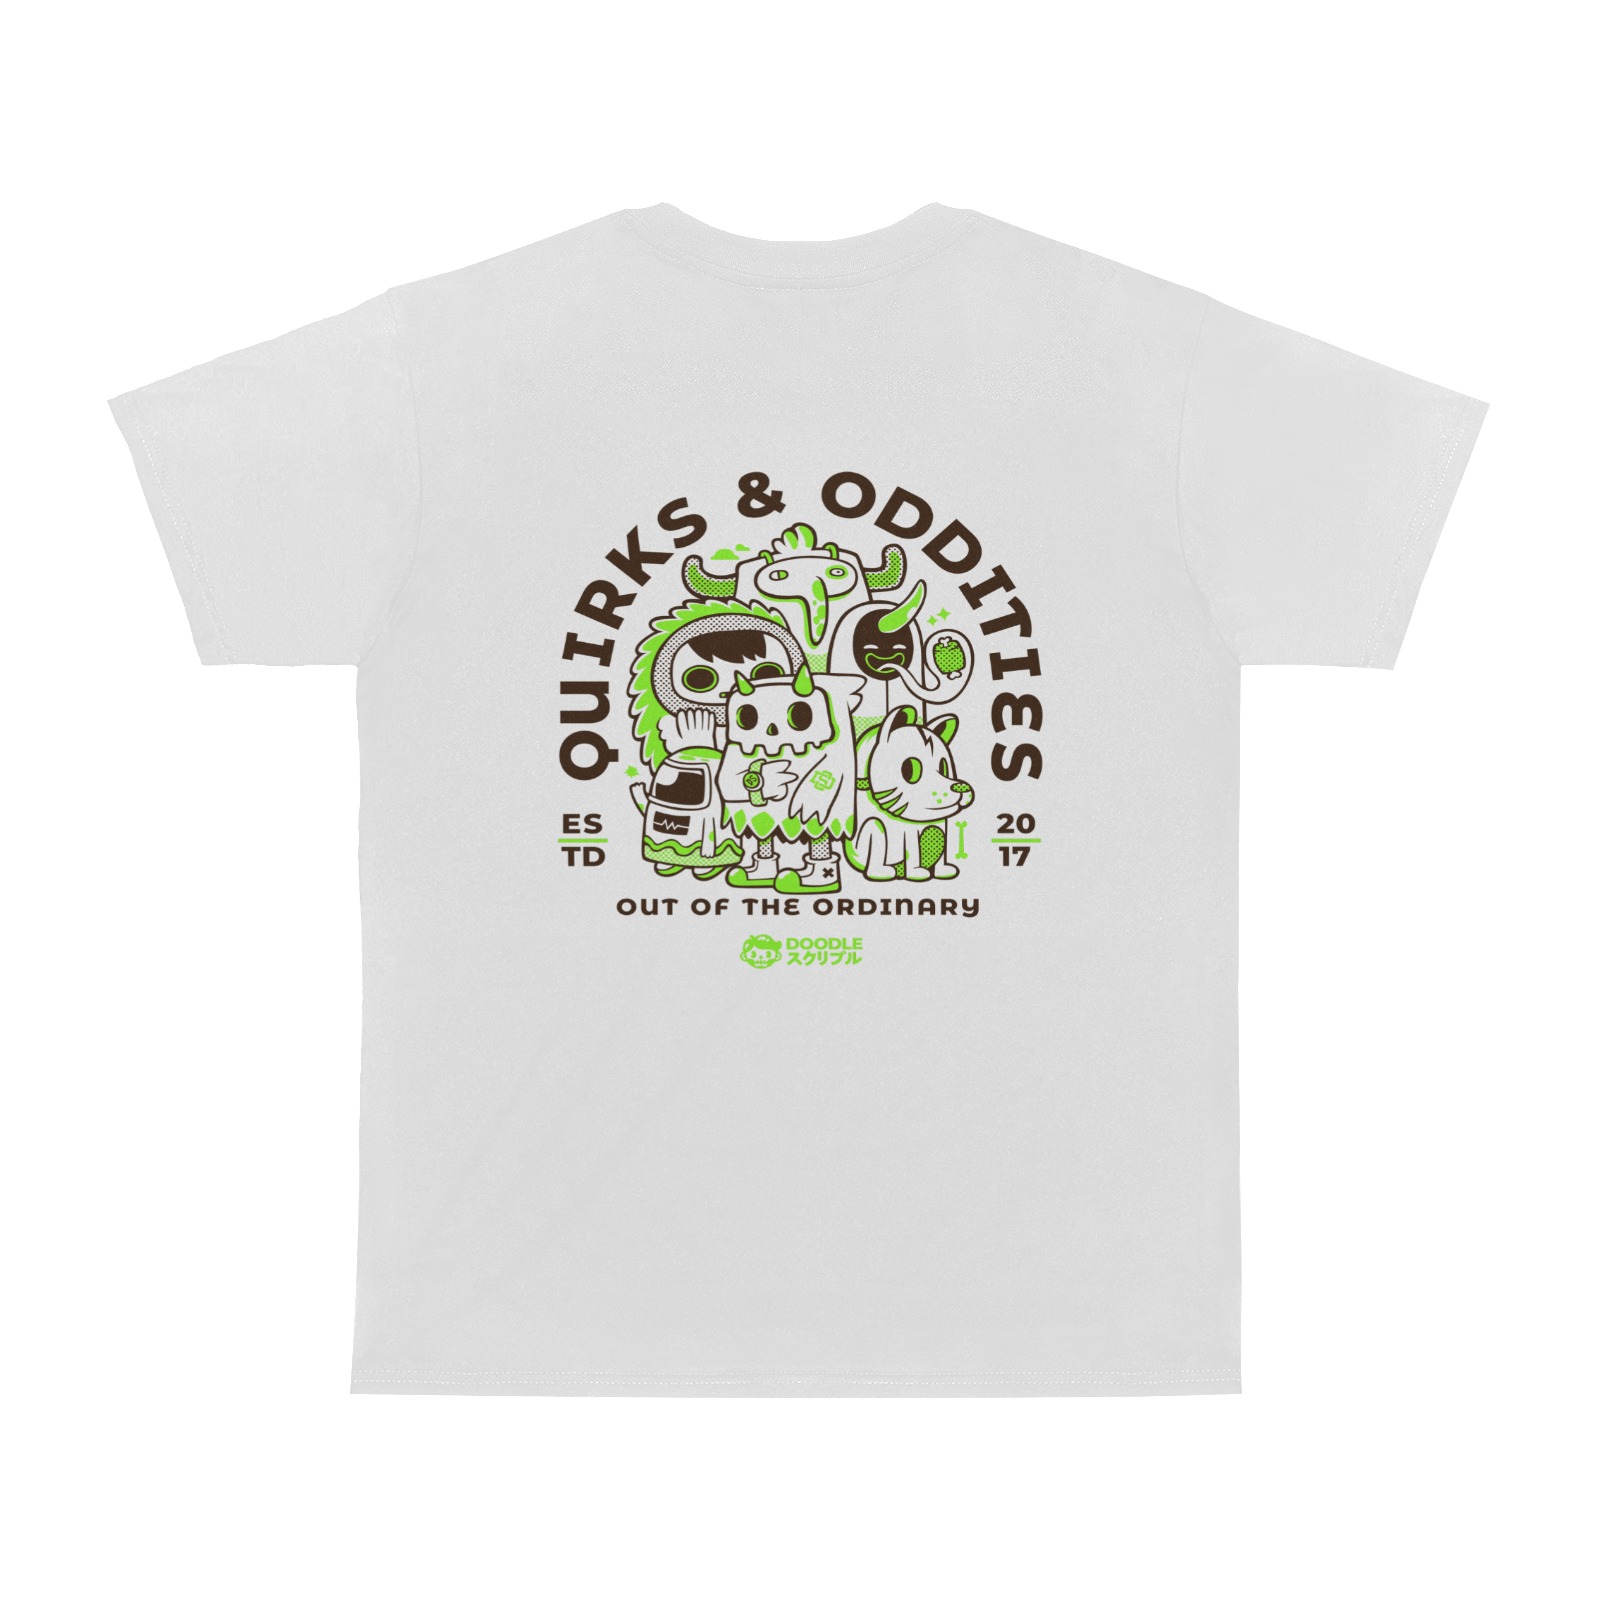 Quirks&oddities Men's T-Shirt in USA Size (Two Sides Printing)